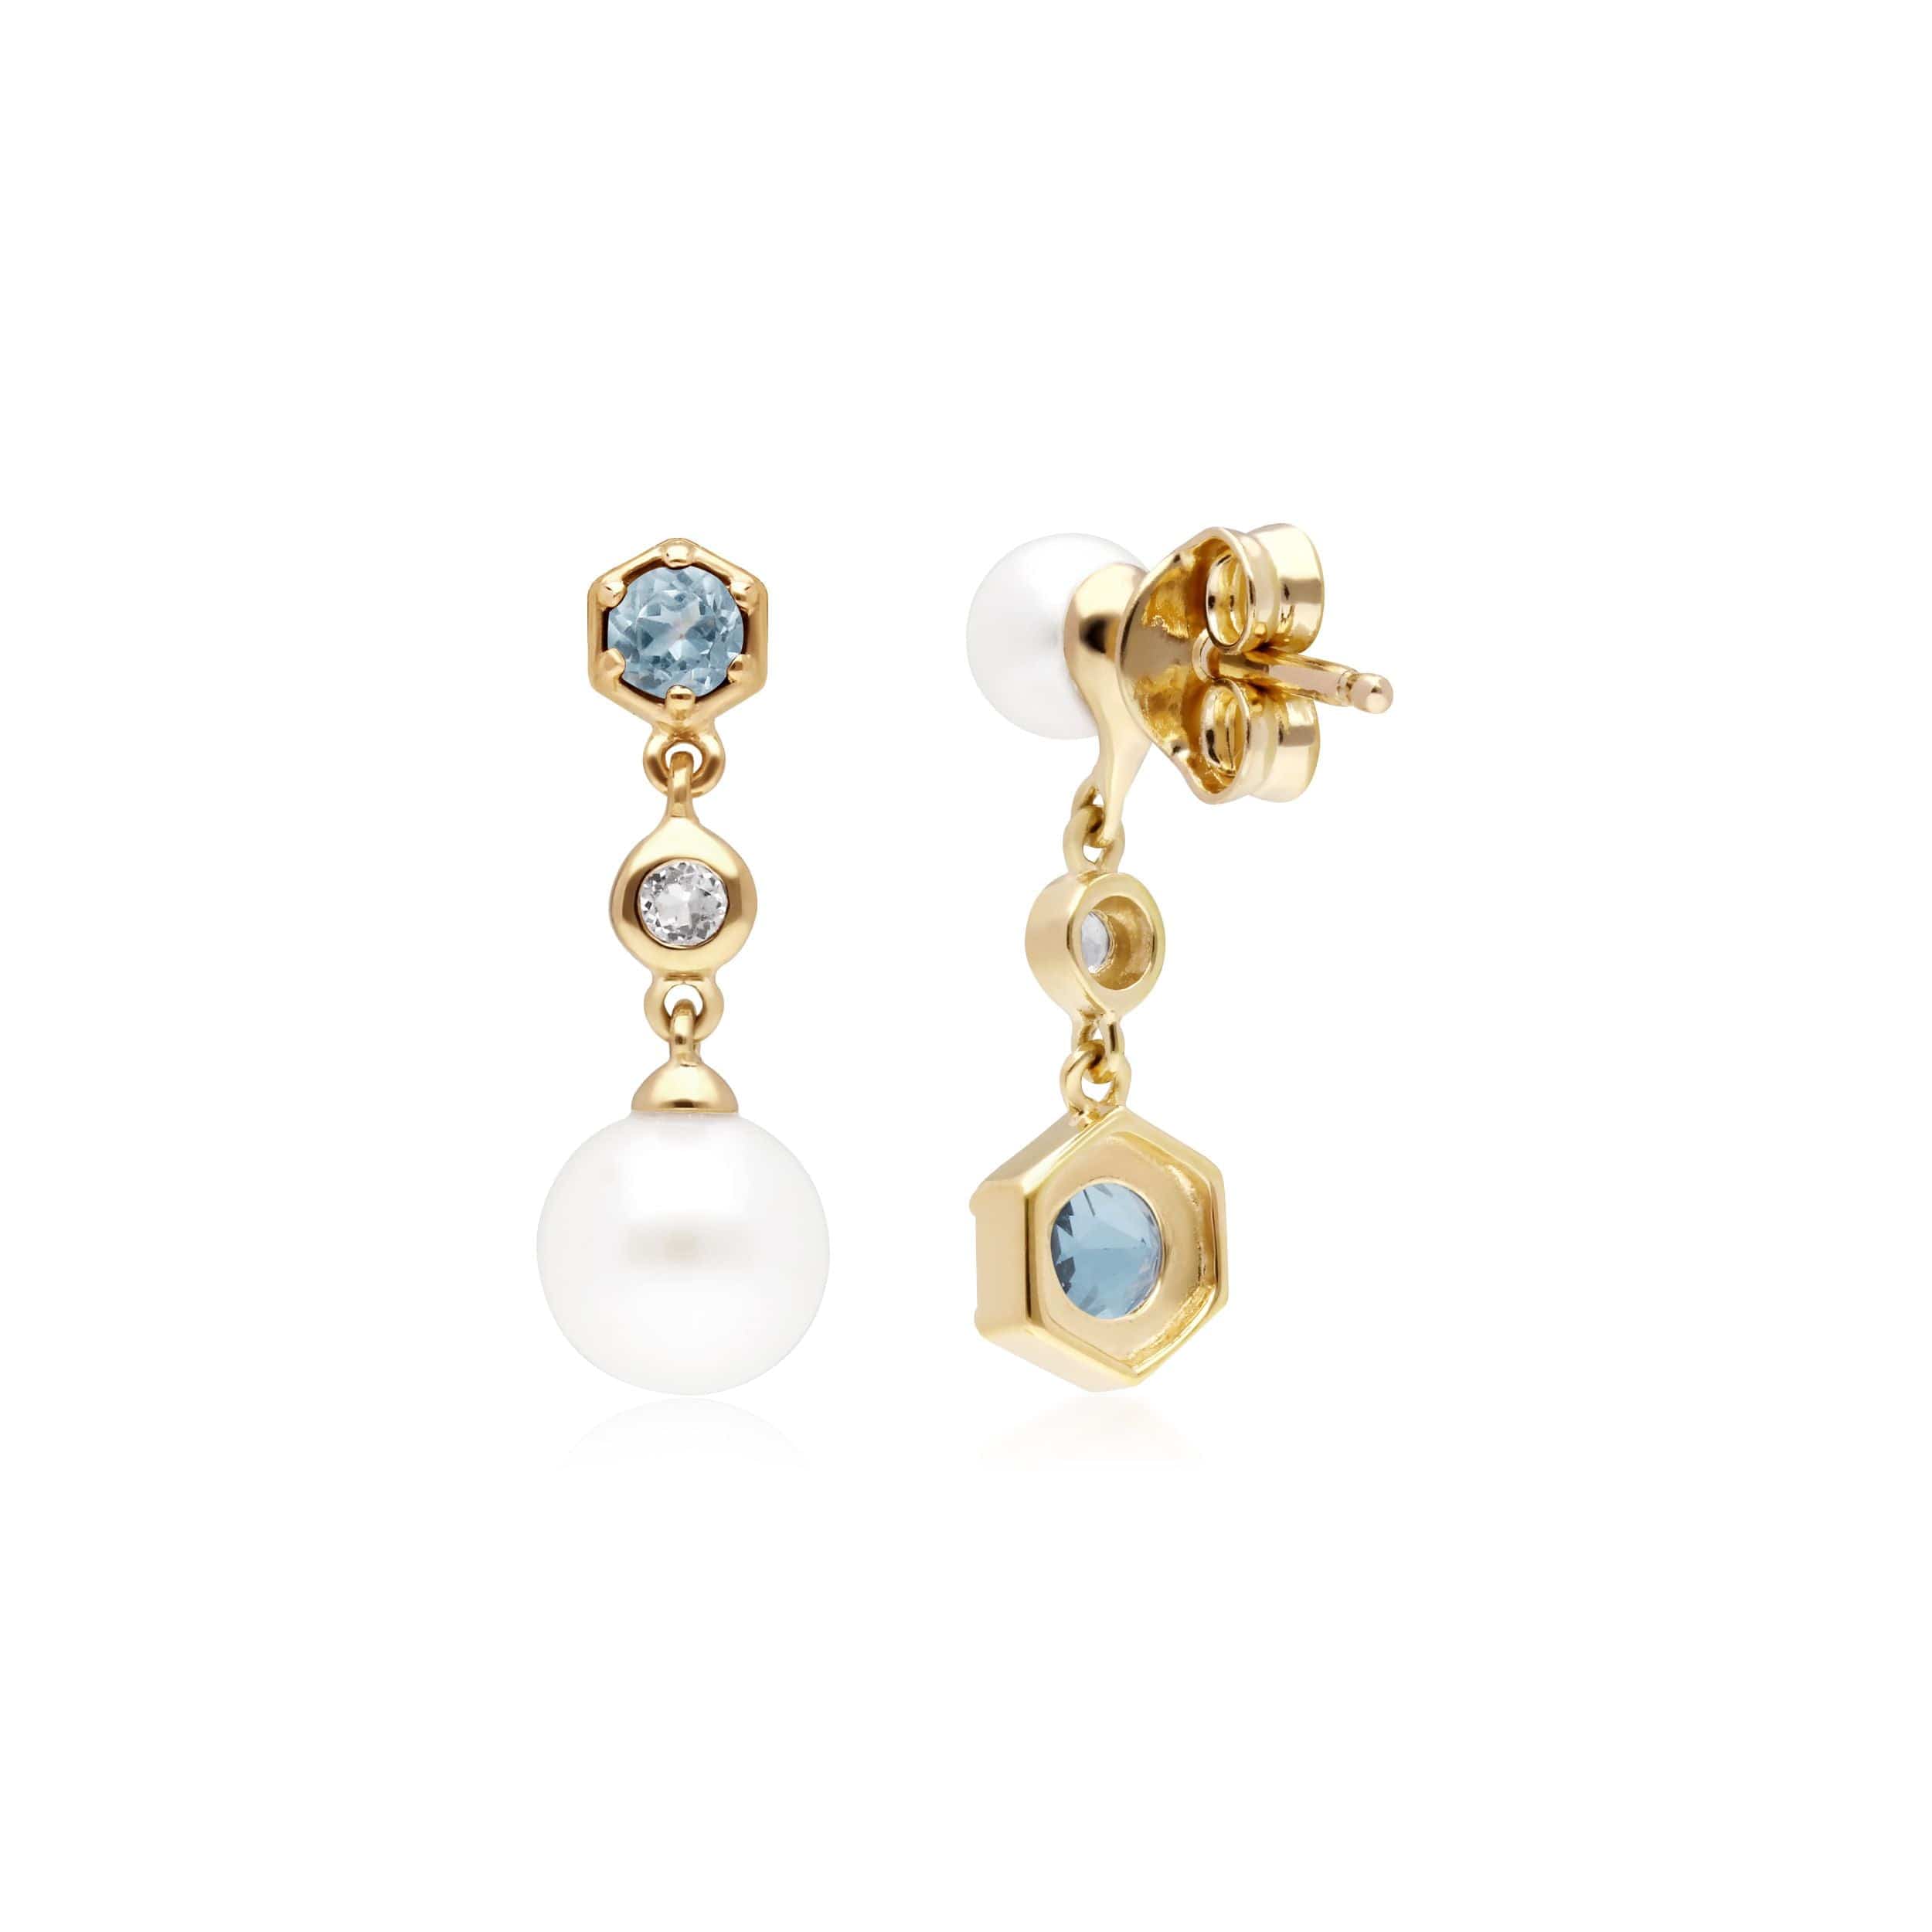 Modern Pearl, White & Blue Topaz Mismatched Drop Earrings in Gold Plated Silver - Gemondo